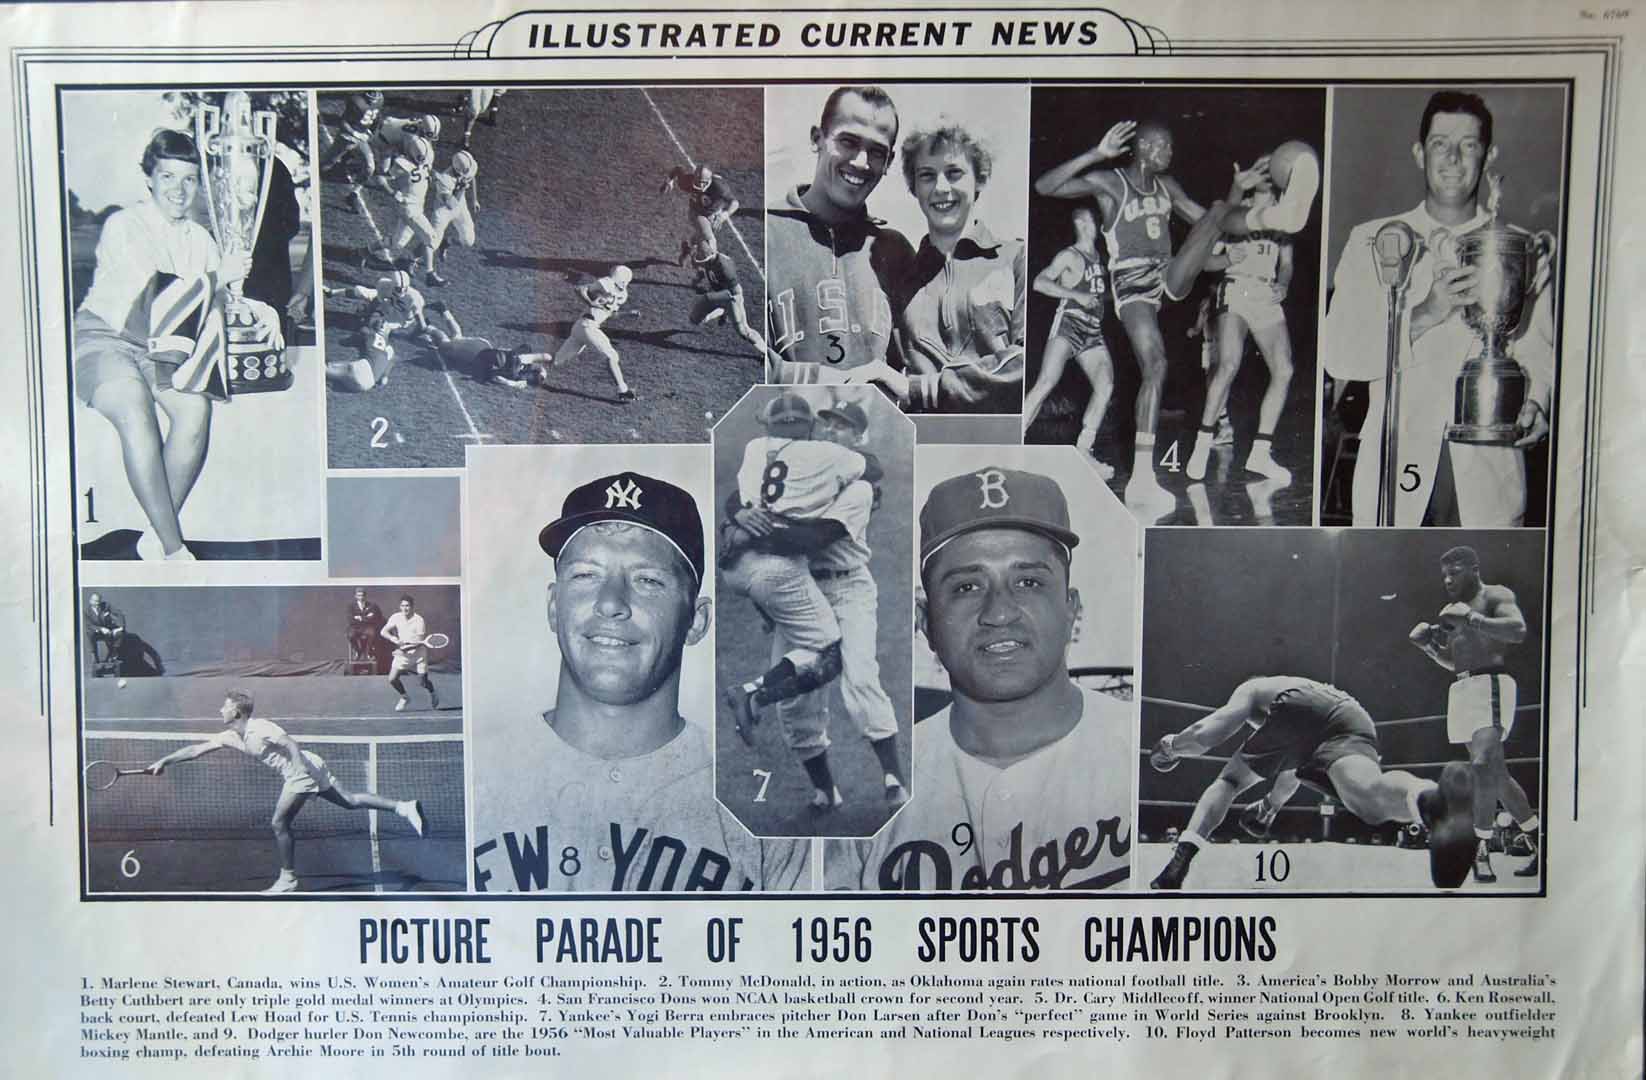 1956 illustrated current news